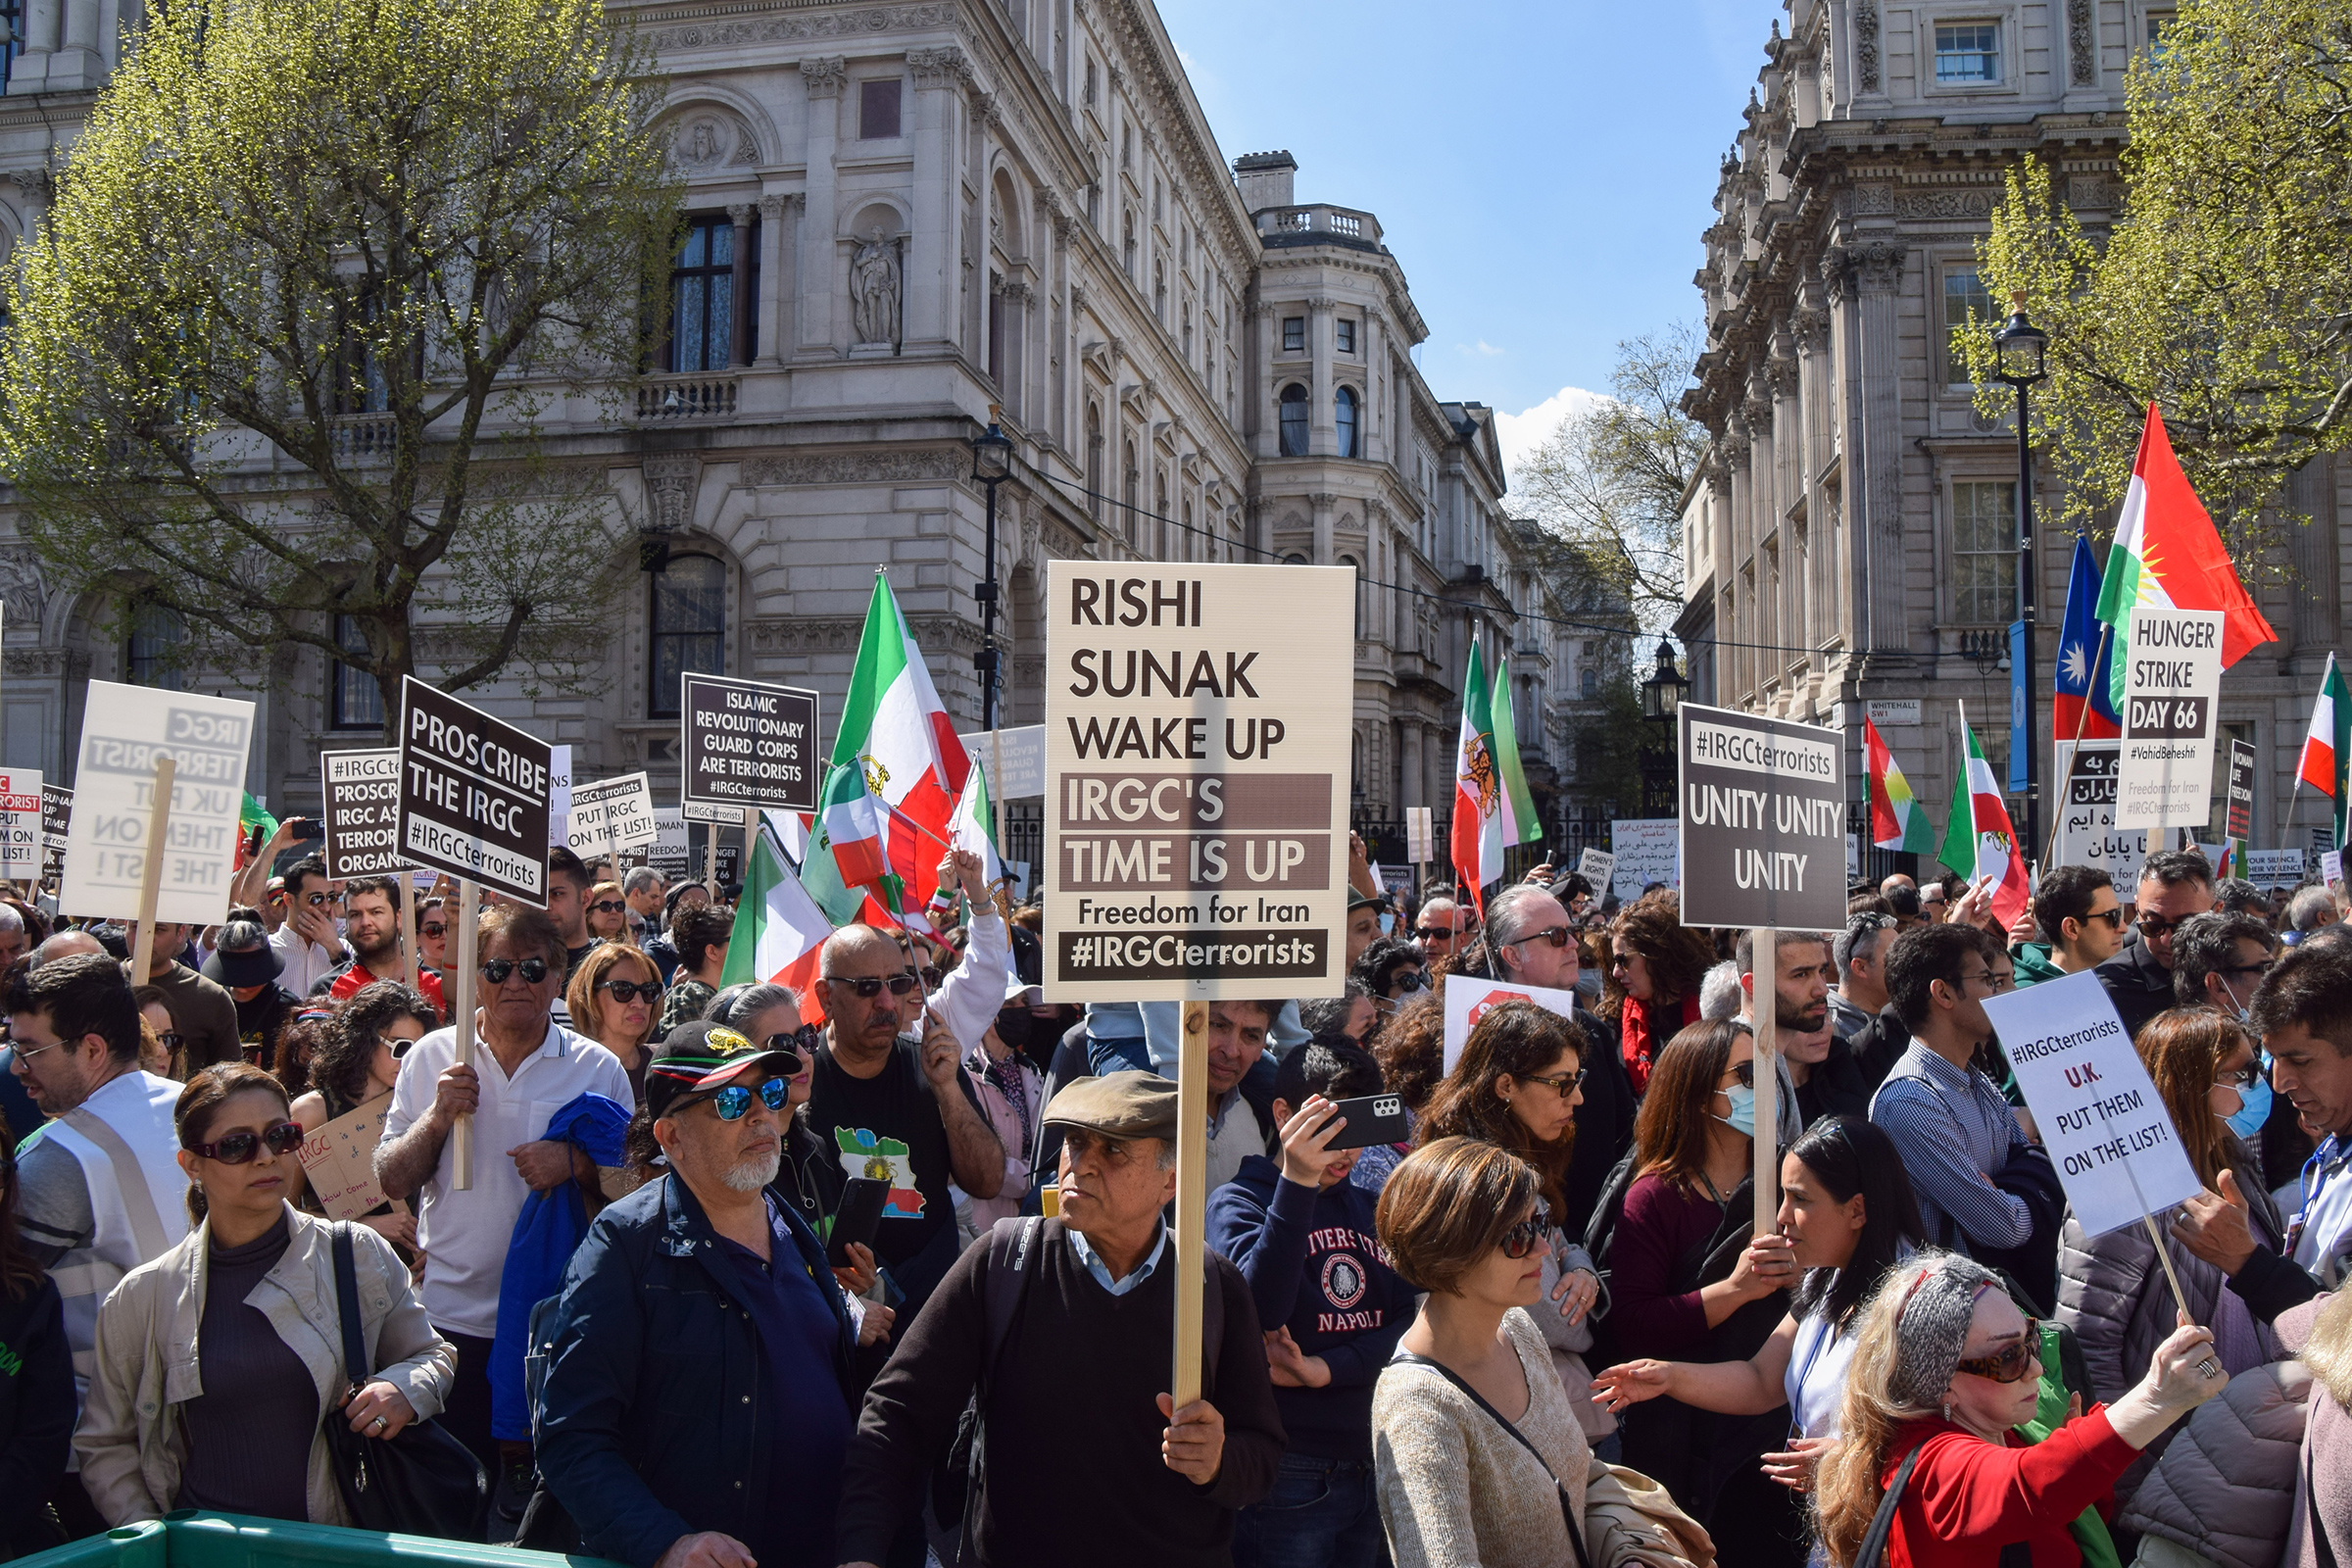 A protester holds a "Rishi Sunak wake up" placard during the demonstration outside Downing Street in London on April 29. Thousands of protesters marched to Downing Street demanding that the UK Government proscribes the Islamic Revolutionary Guard Corps (IRGC) in Iran as a terrorist organisation. (Vuk Valcic—SOPA Images/Shutterstock)